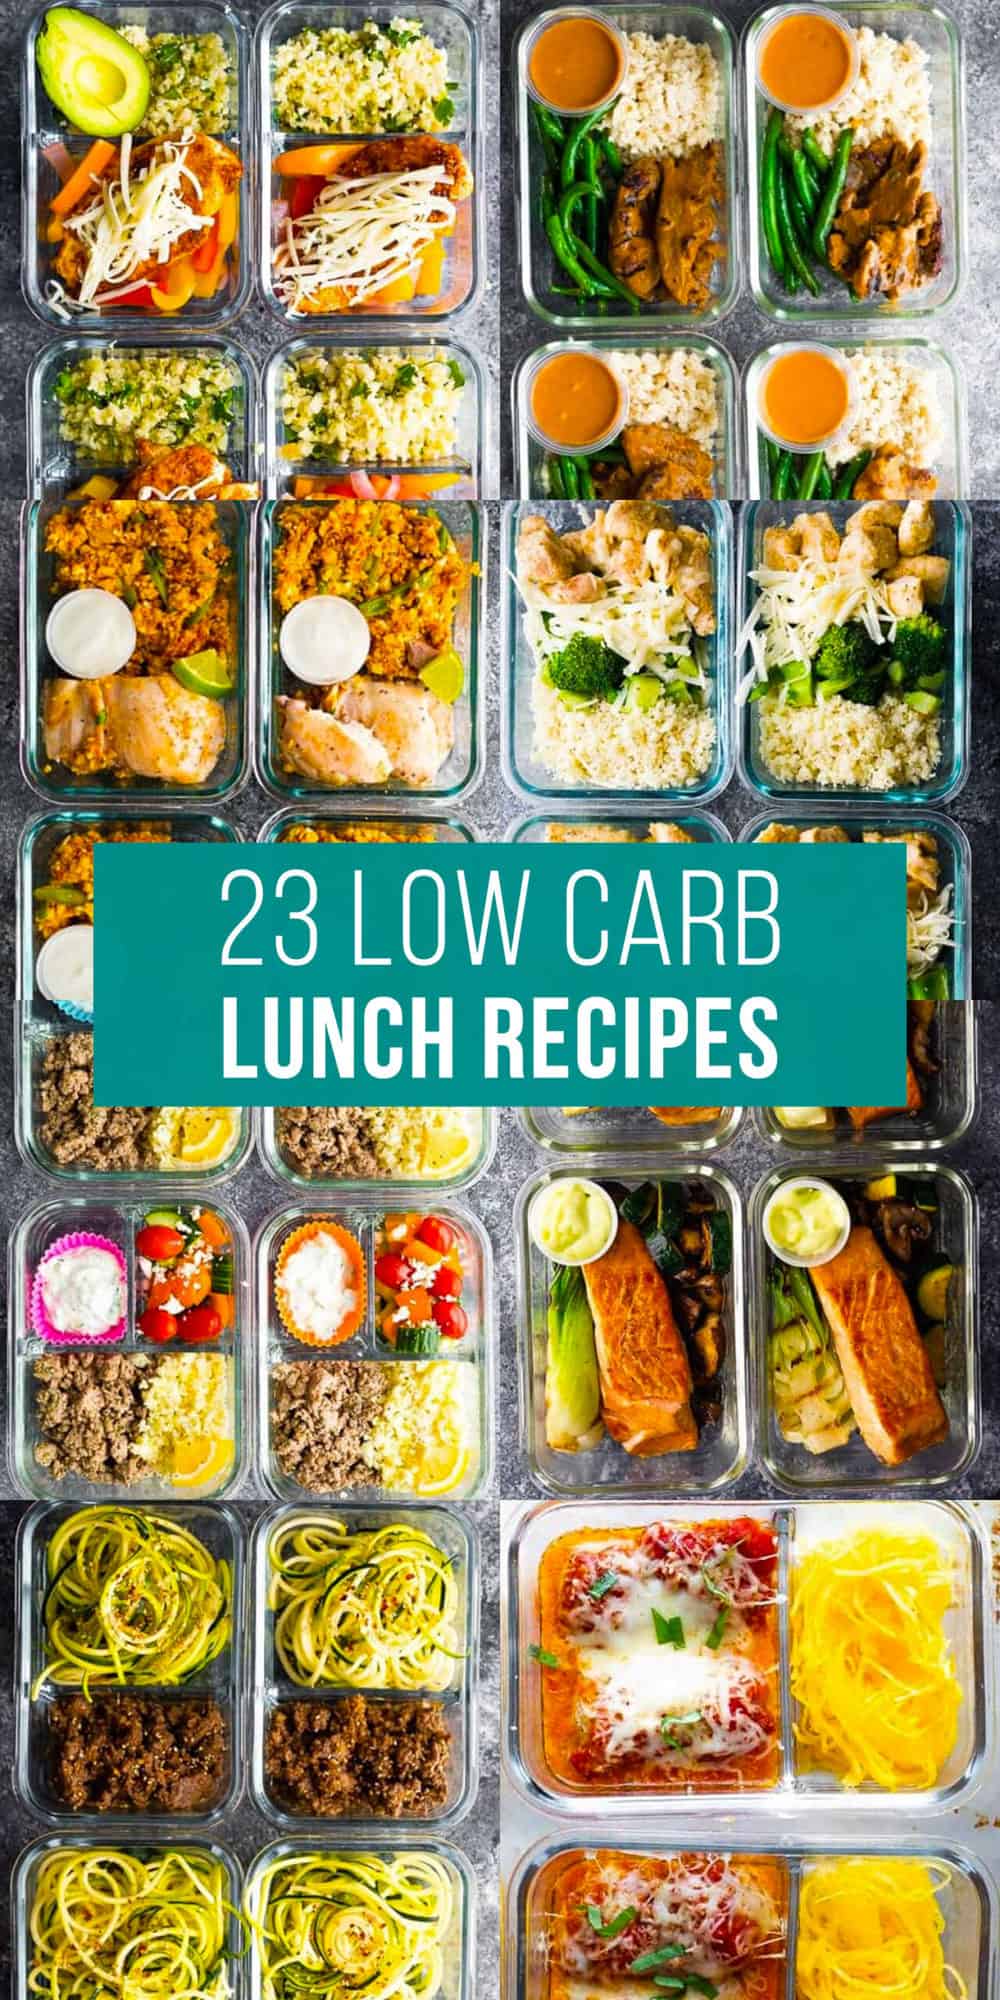 composite image with text: 23 low carb lunch recipes. Image shows 8 overhead photos of low carb lunches in glass meal prep containers